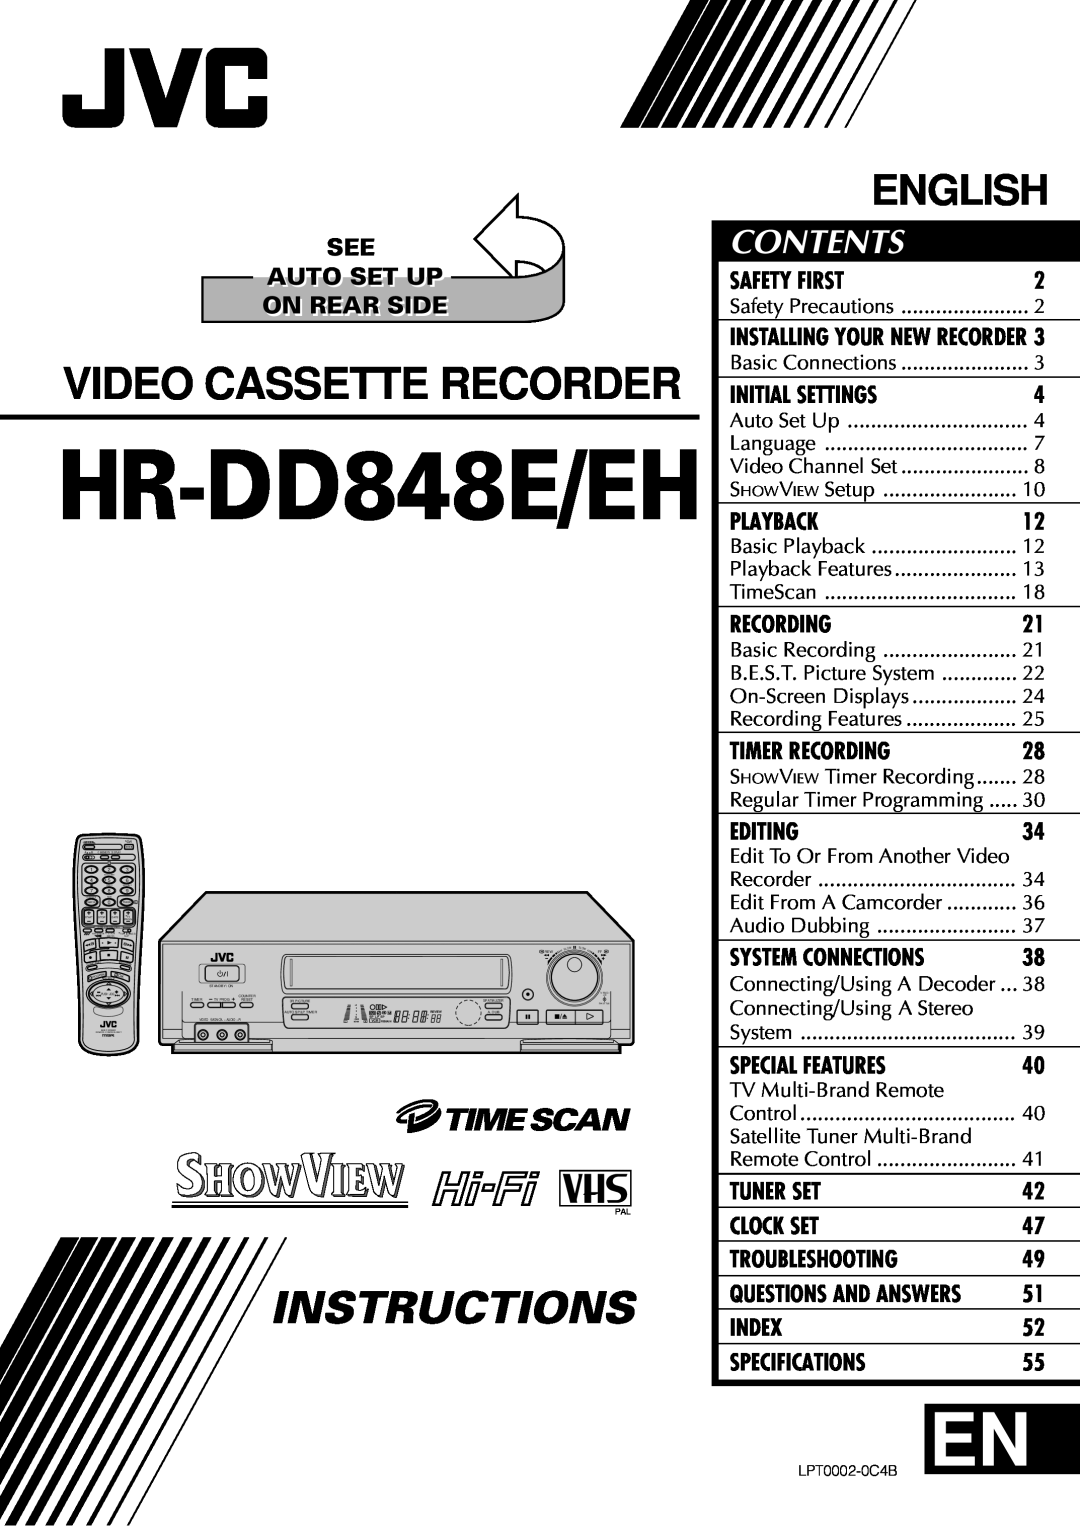 JVC specifications HR-DD848E/EH, Video Cassette Recorder, Instructions, English, Contents 